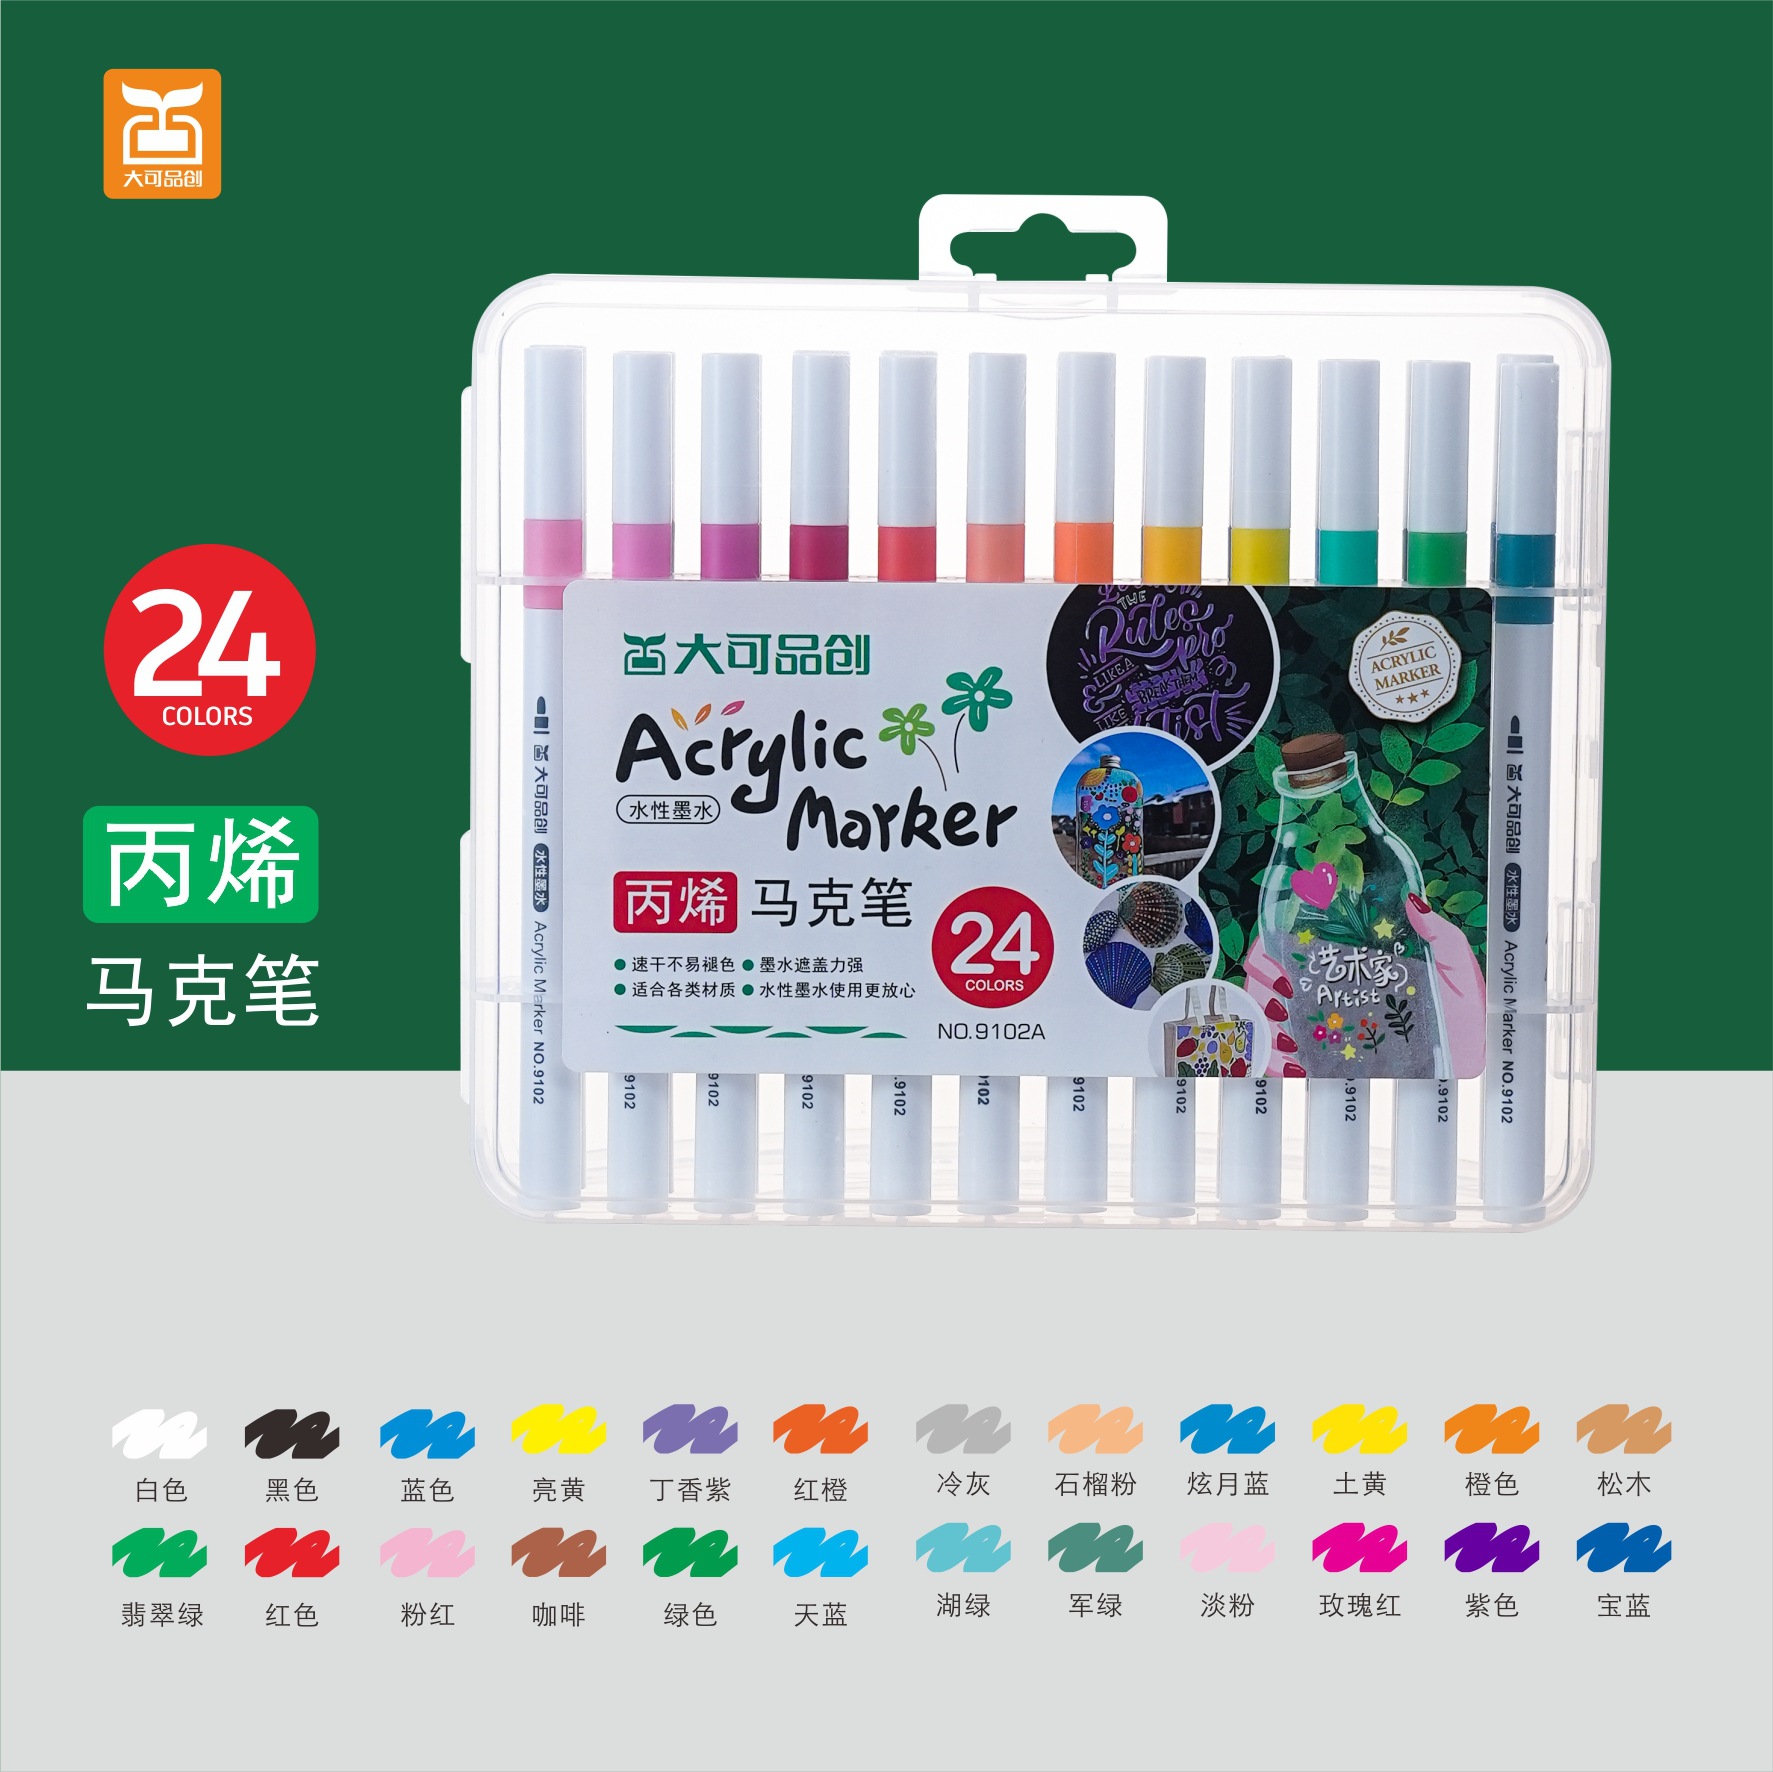 Acrylic Marker Pen Crayon/48/60 Children's DIY Painting Thin Rod Water-Based Mark Pen Opaque Paper Stackable